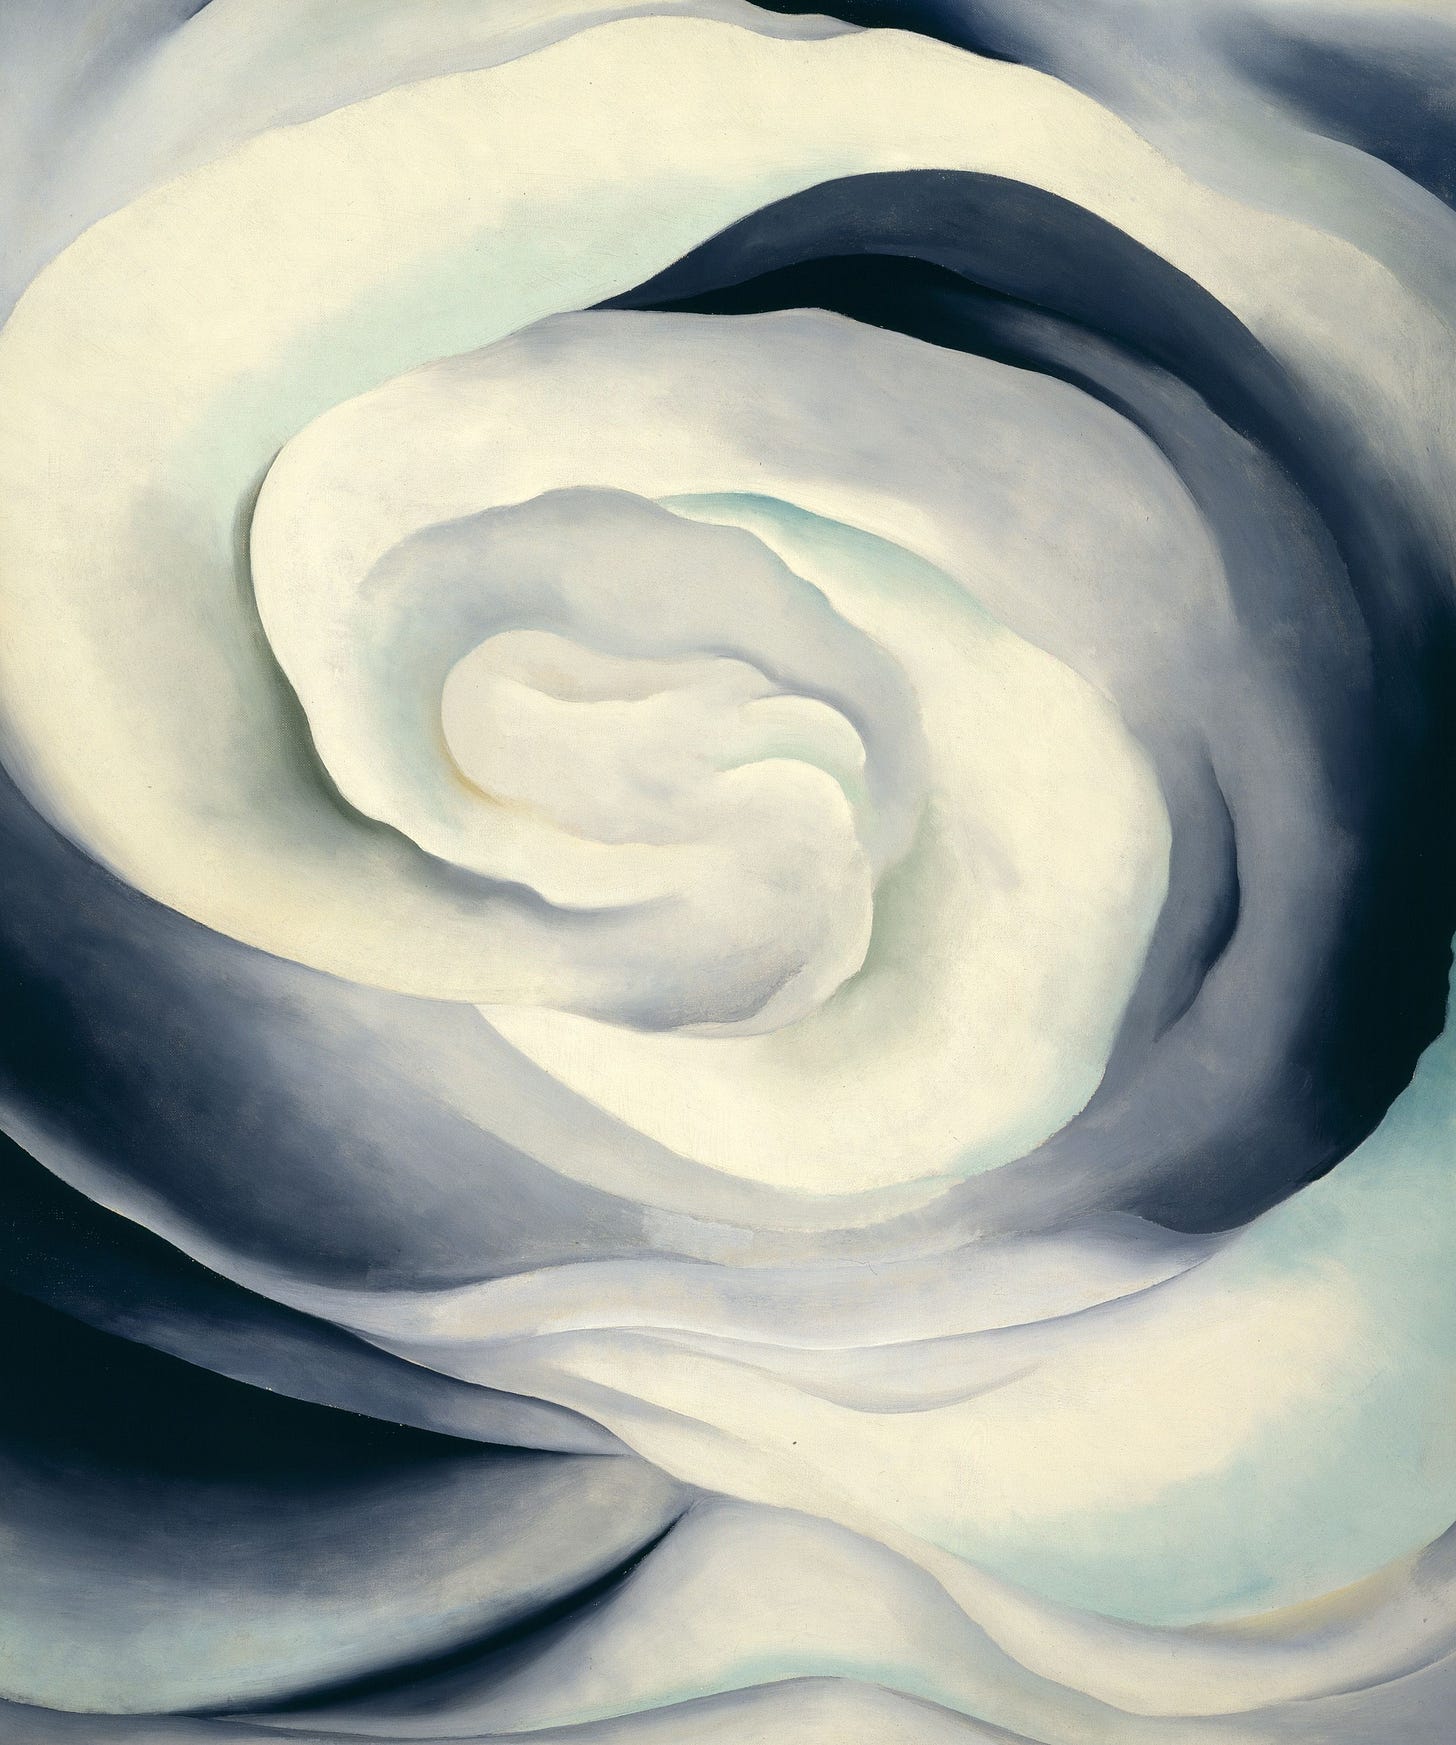 Georgia O'Keeffe Abstraction White Rose 1927 Oil on canvas 36 x 30 ...